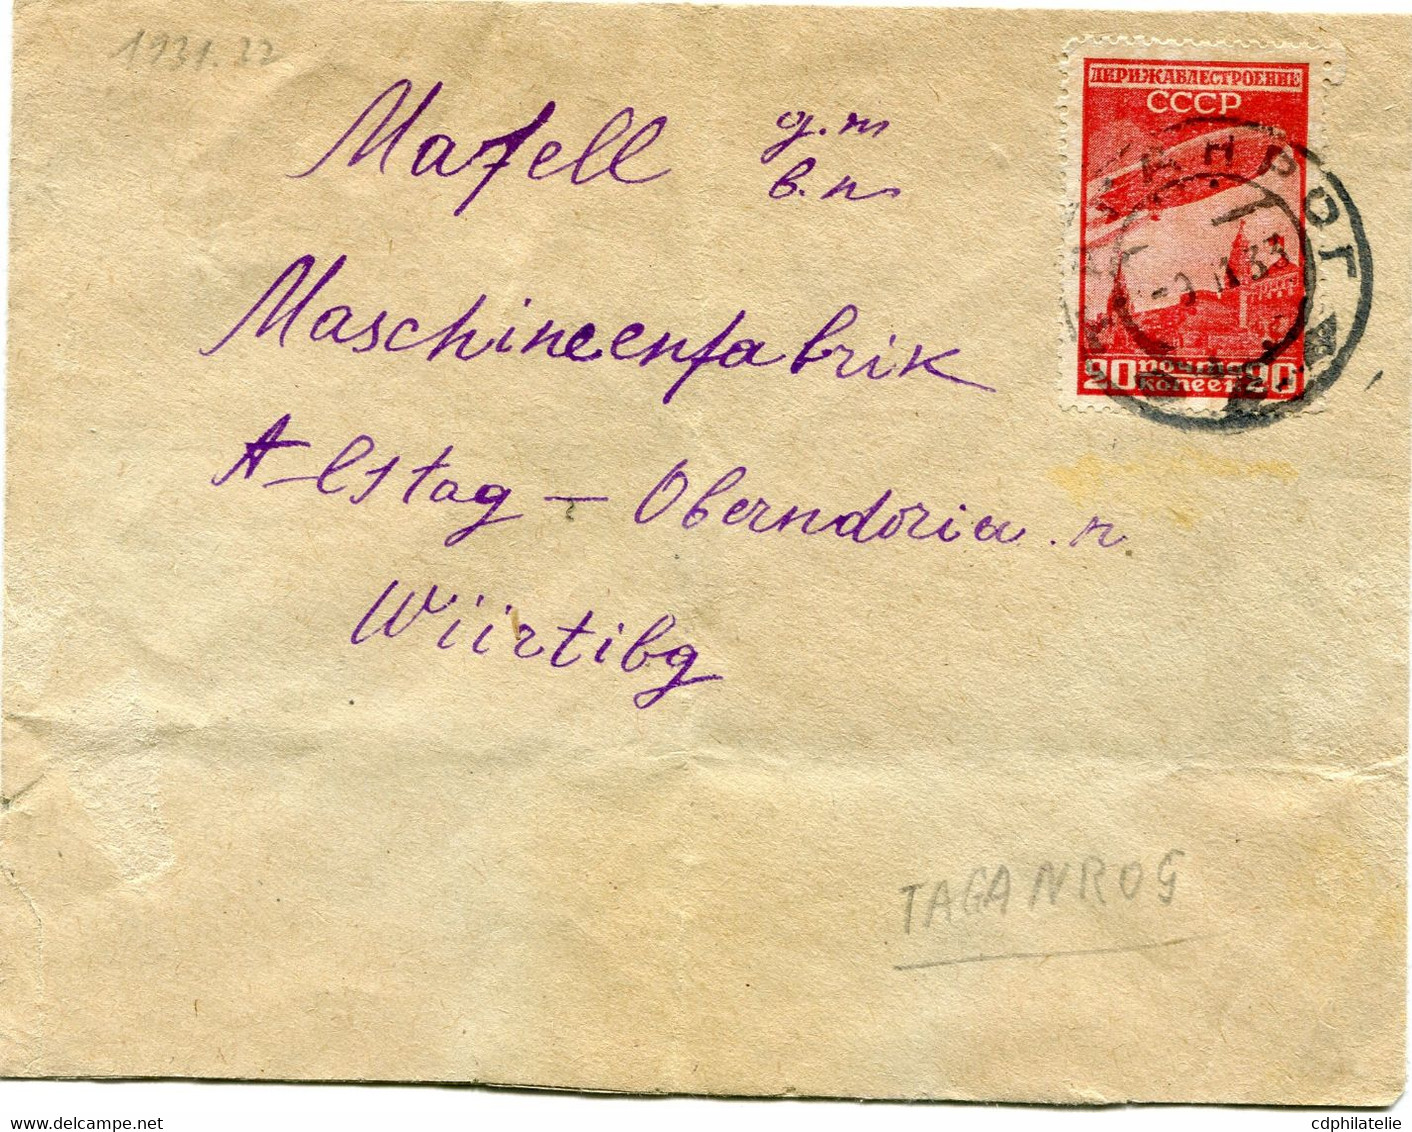 RUSSIE LETTRE DEPART TAGANROG 9-11-33 POUR..... - Covers & Documents